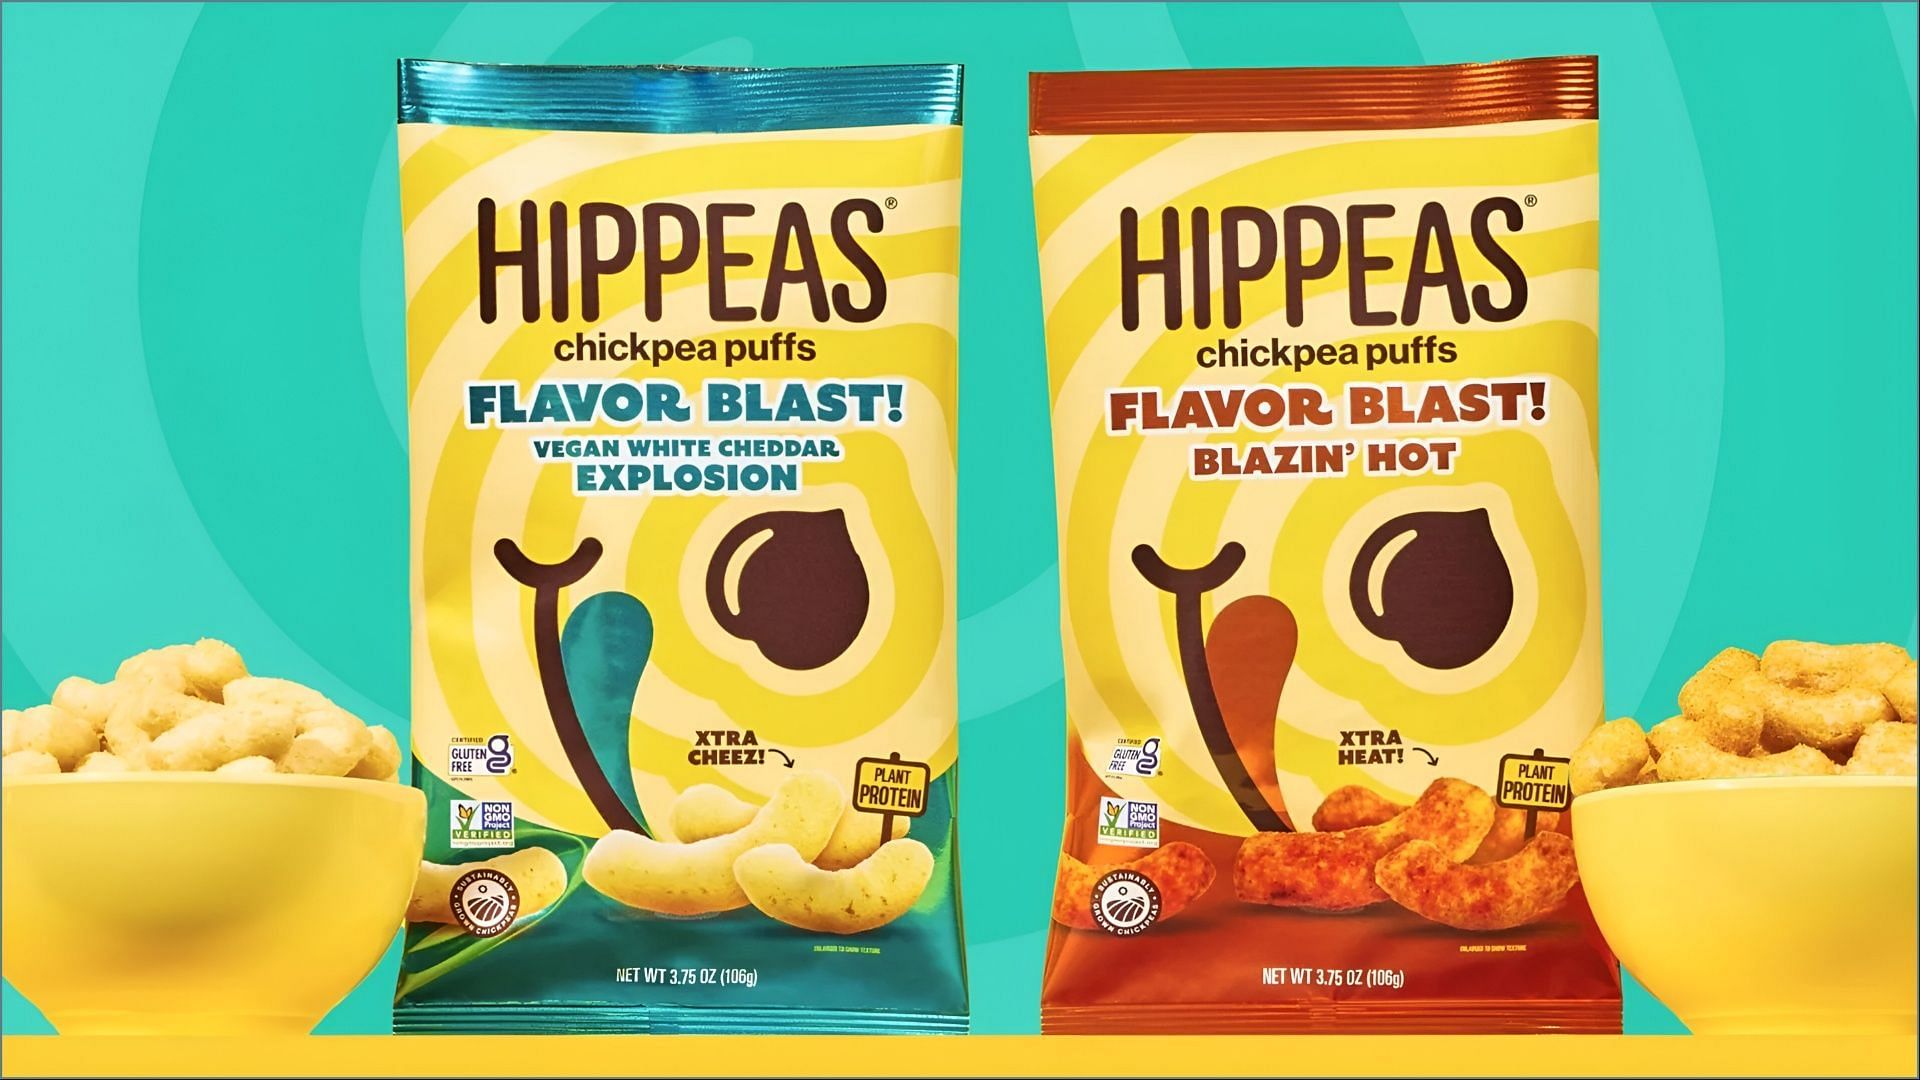 Hippeas introduces a new 